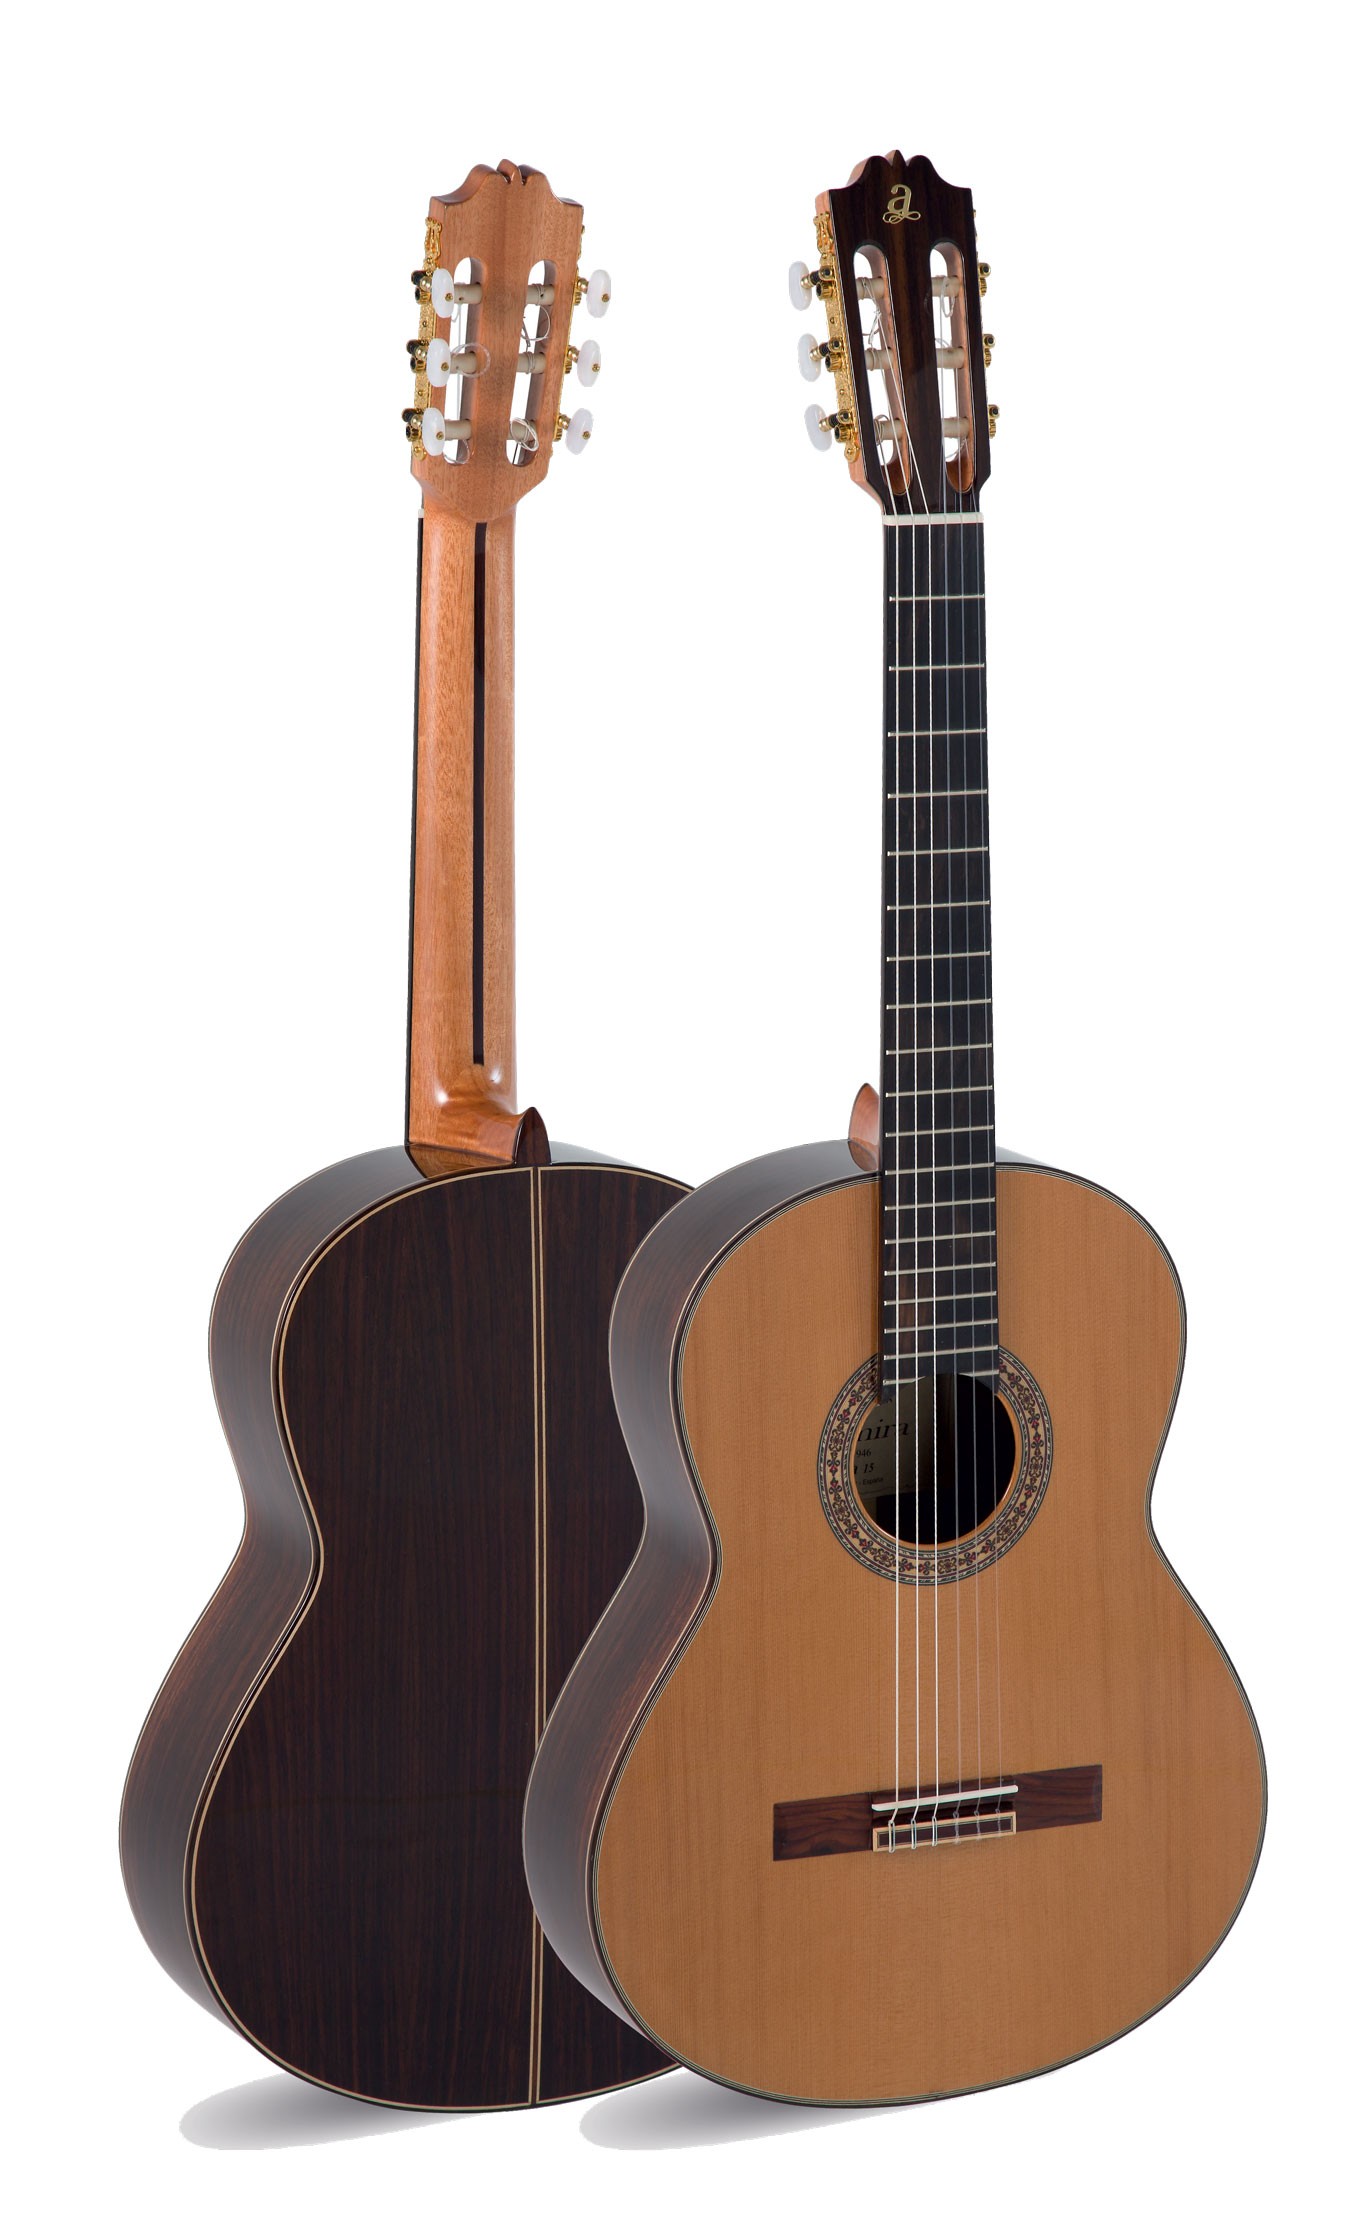 Guitar Admira A15 for sale, best prices for Admira guitars